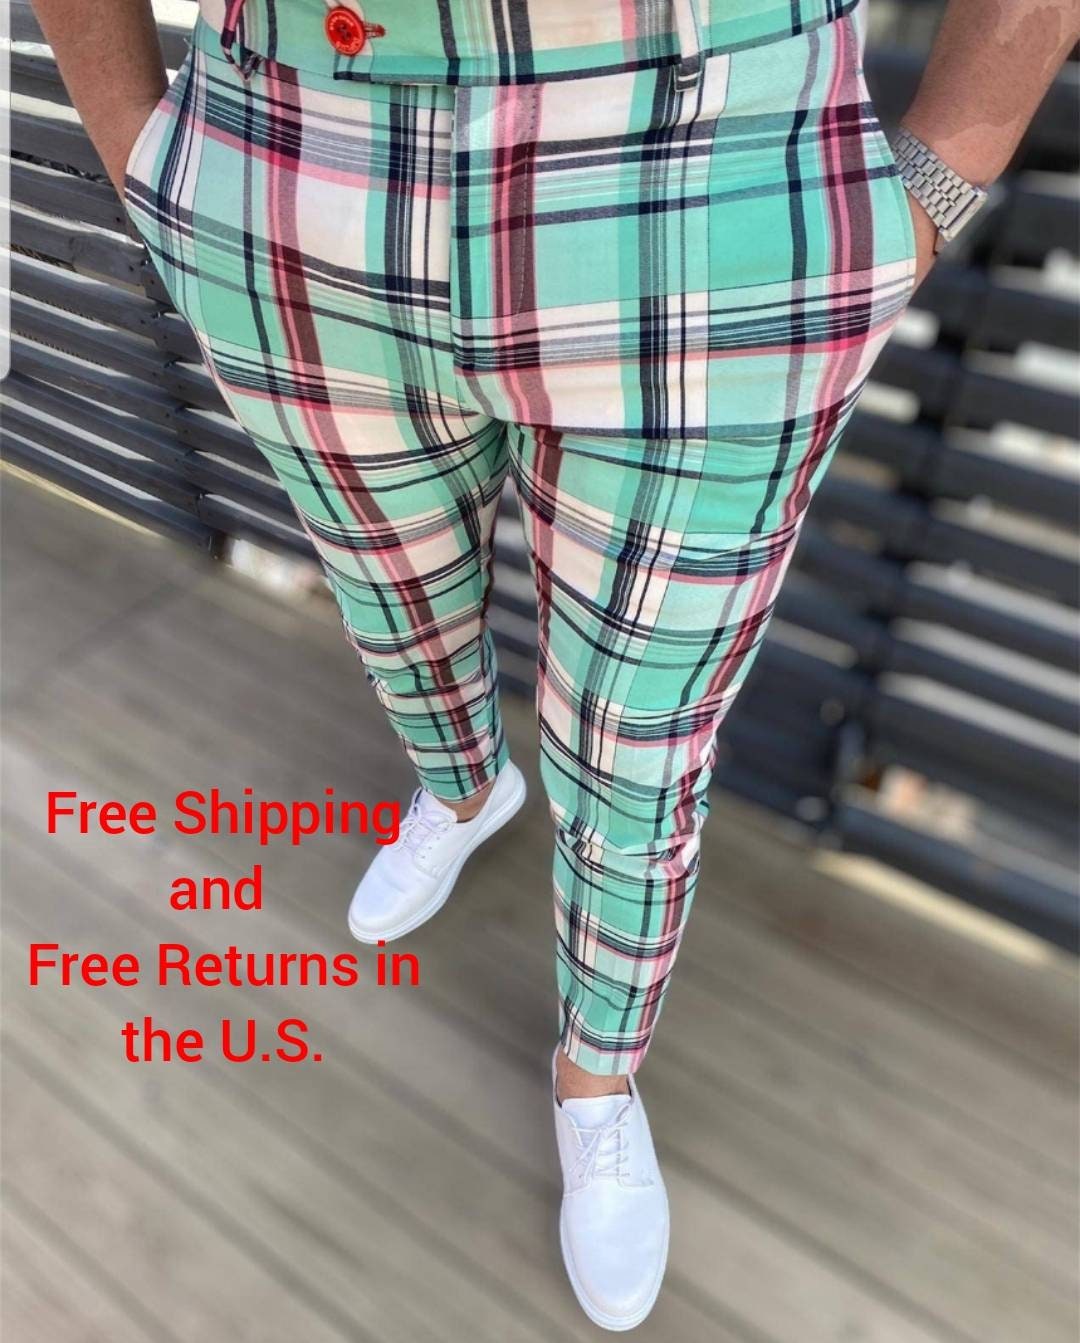 Shop SlimFit Plaid Pants for Men from latest collection at Forever 21   324248